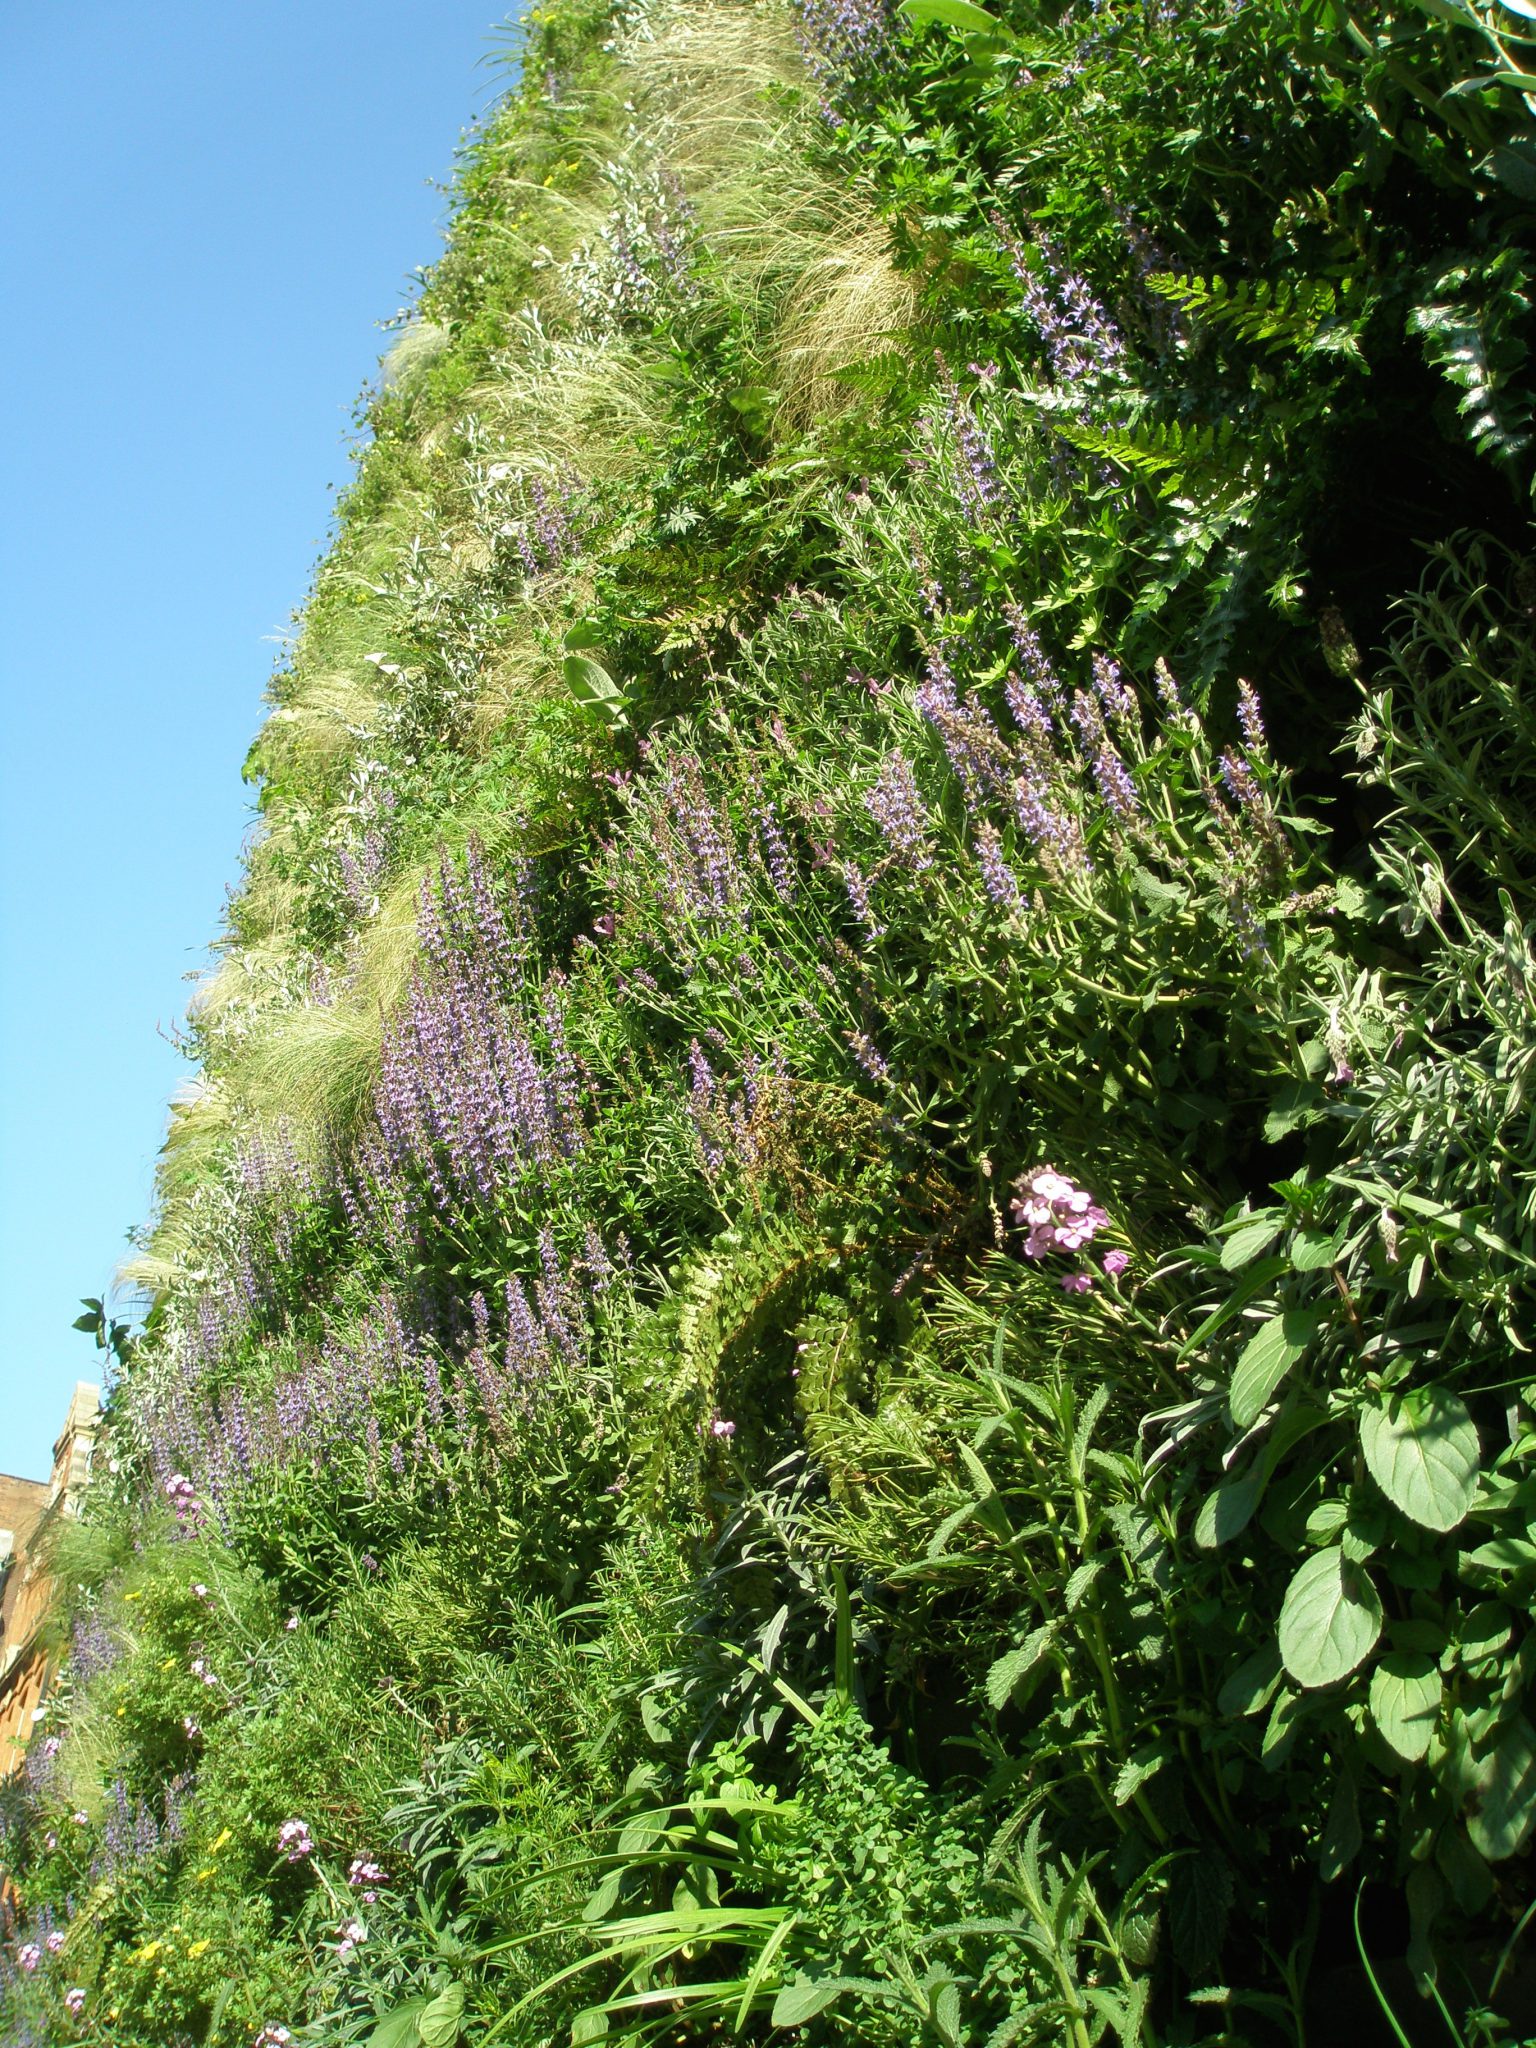 A Nose-Close view of the Green Wall